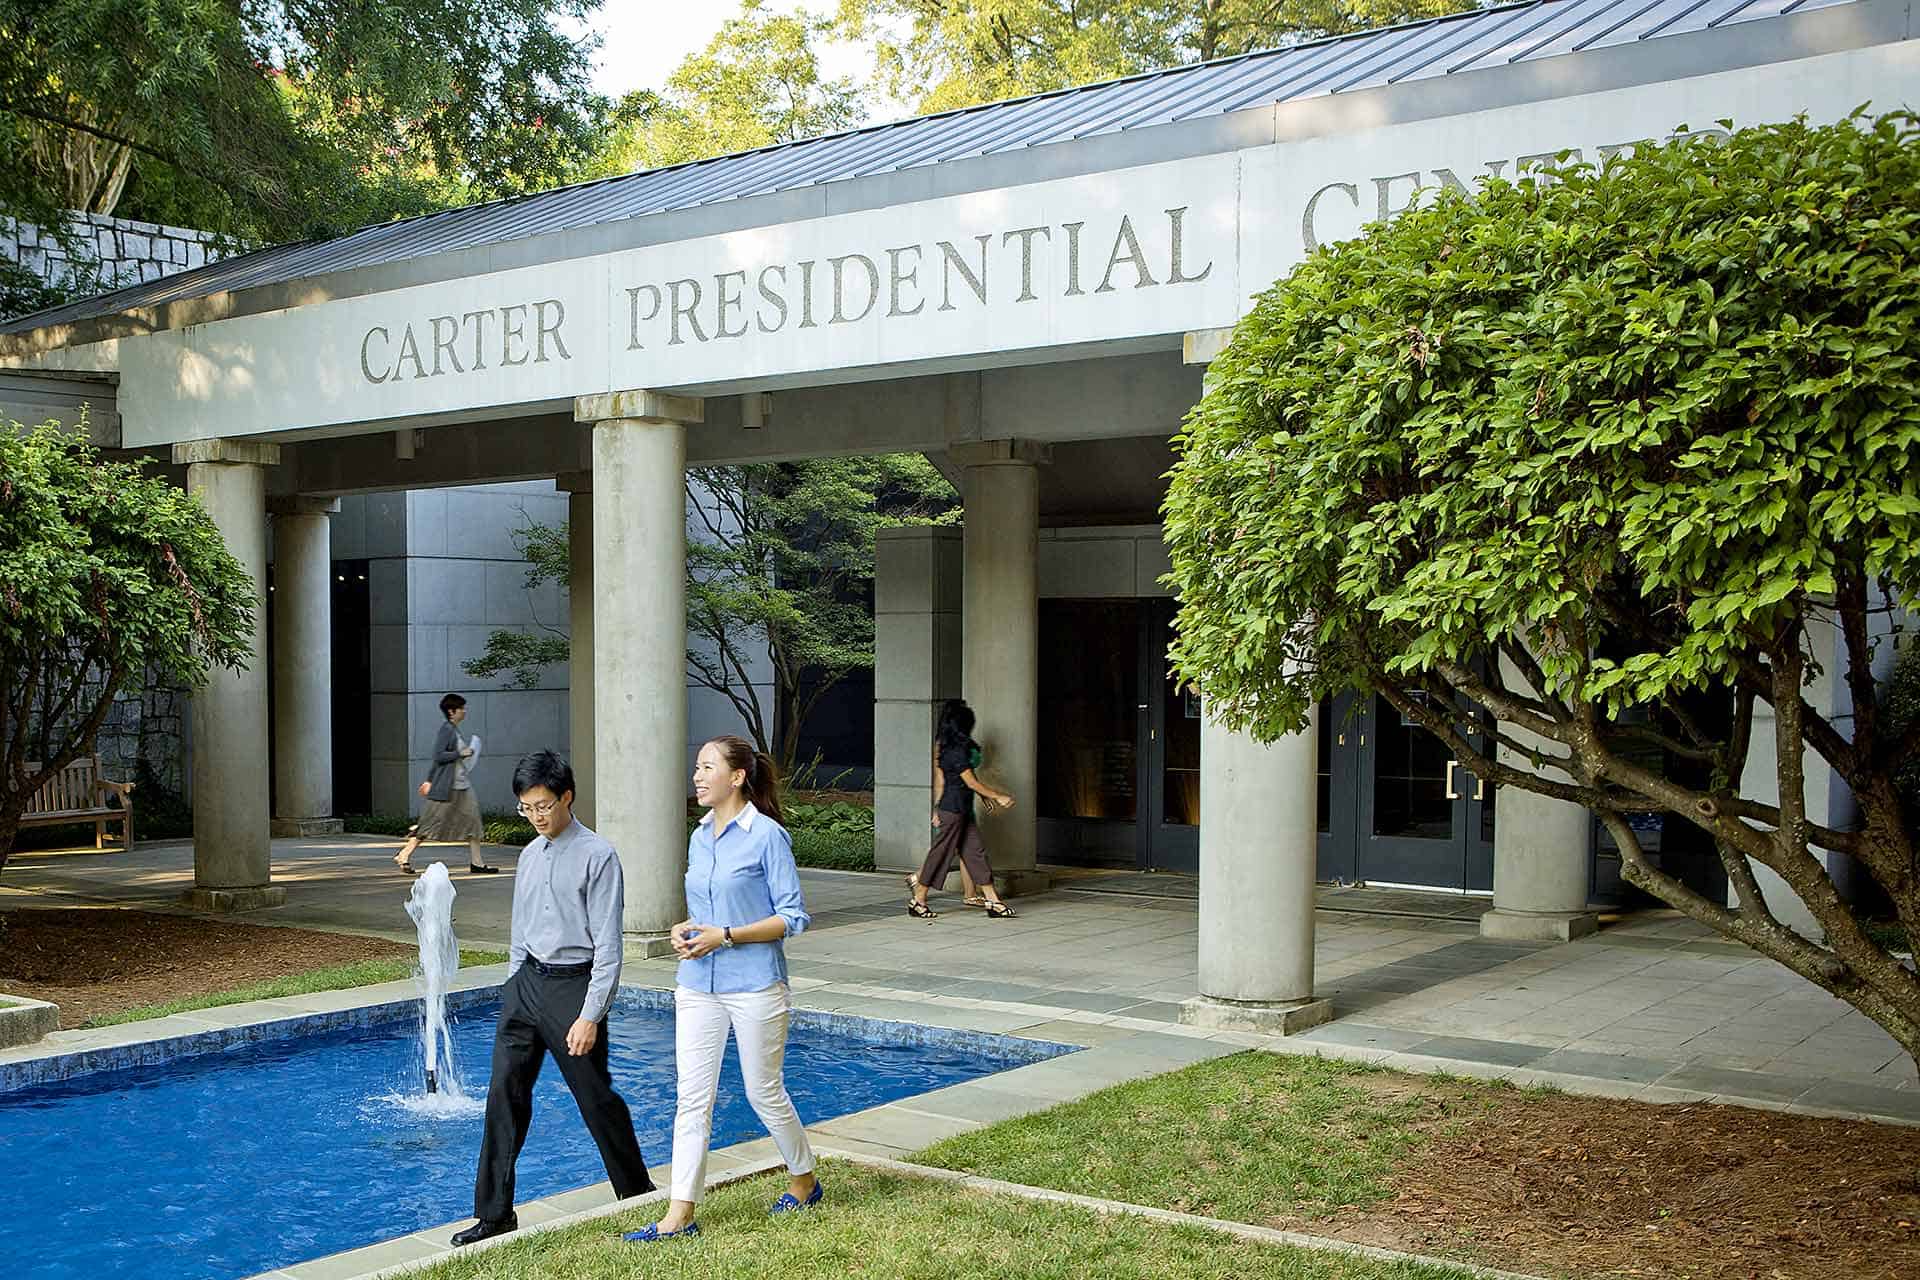 The Jimmy Carter Presidential Library and Museum US Civil Rights Trail